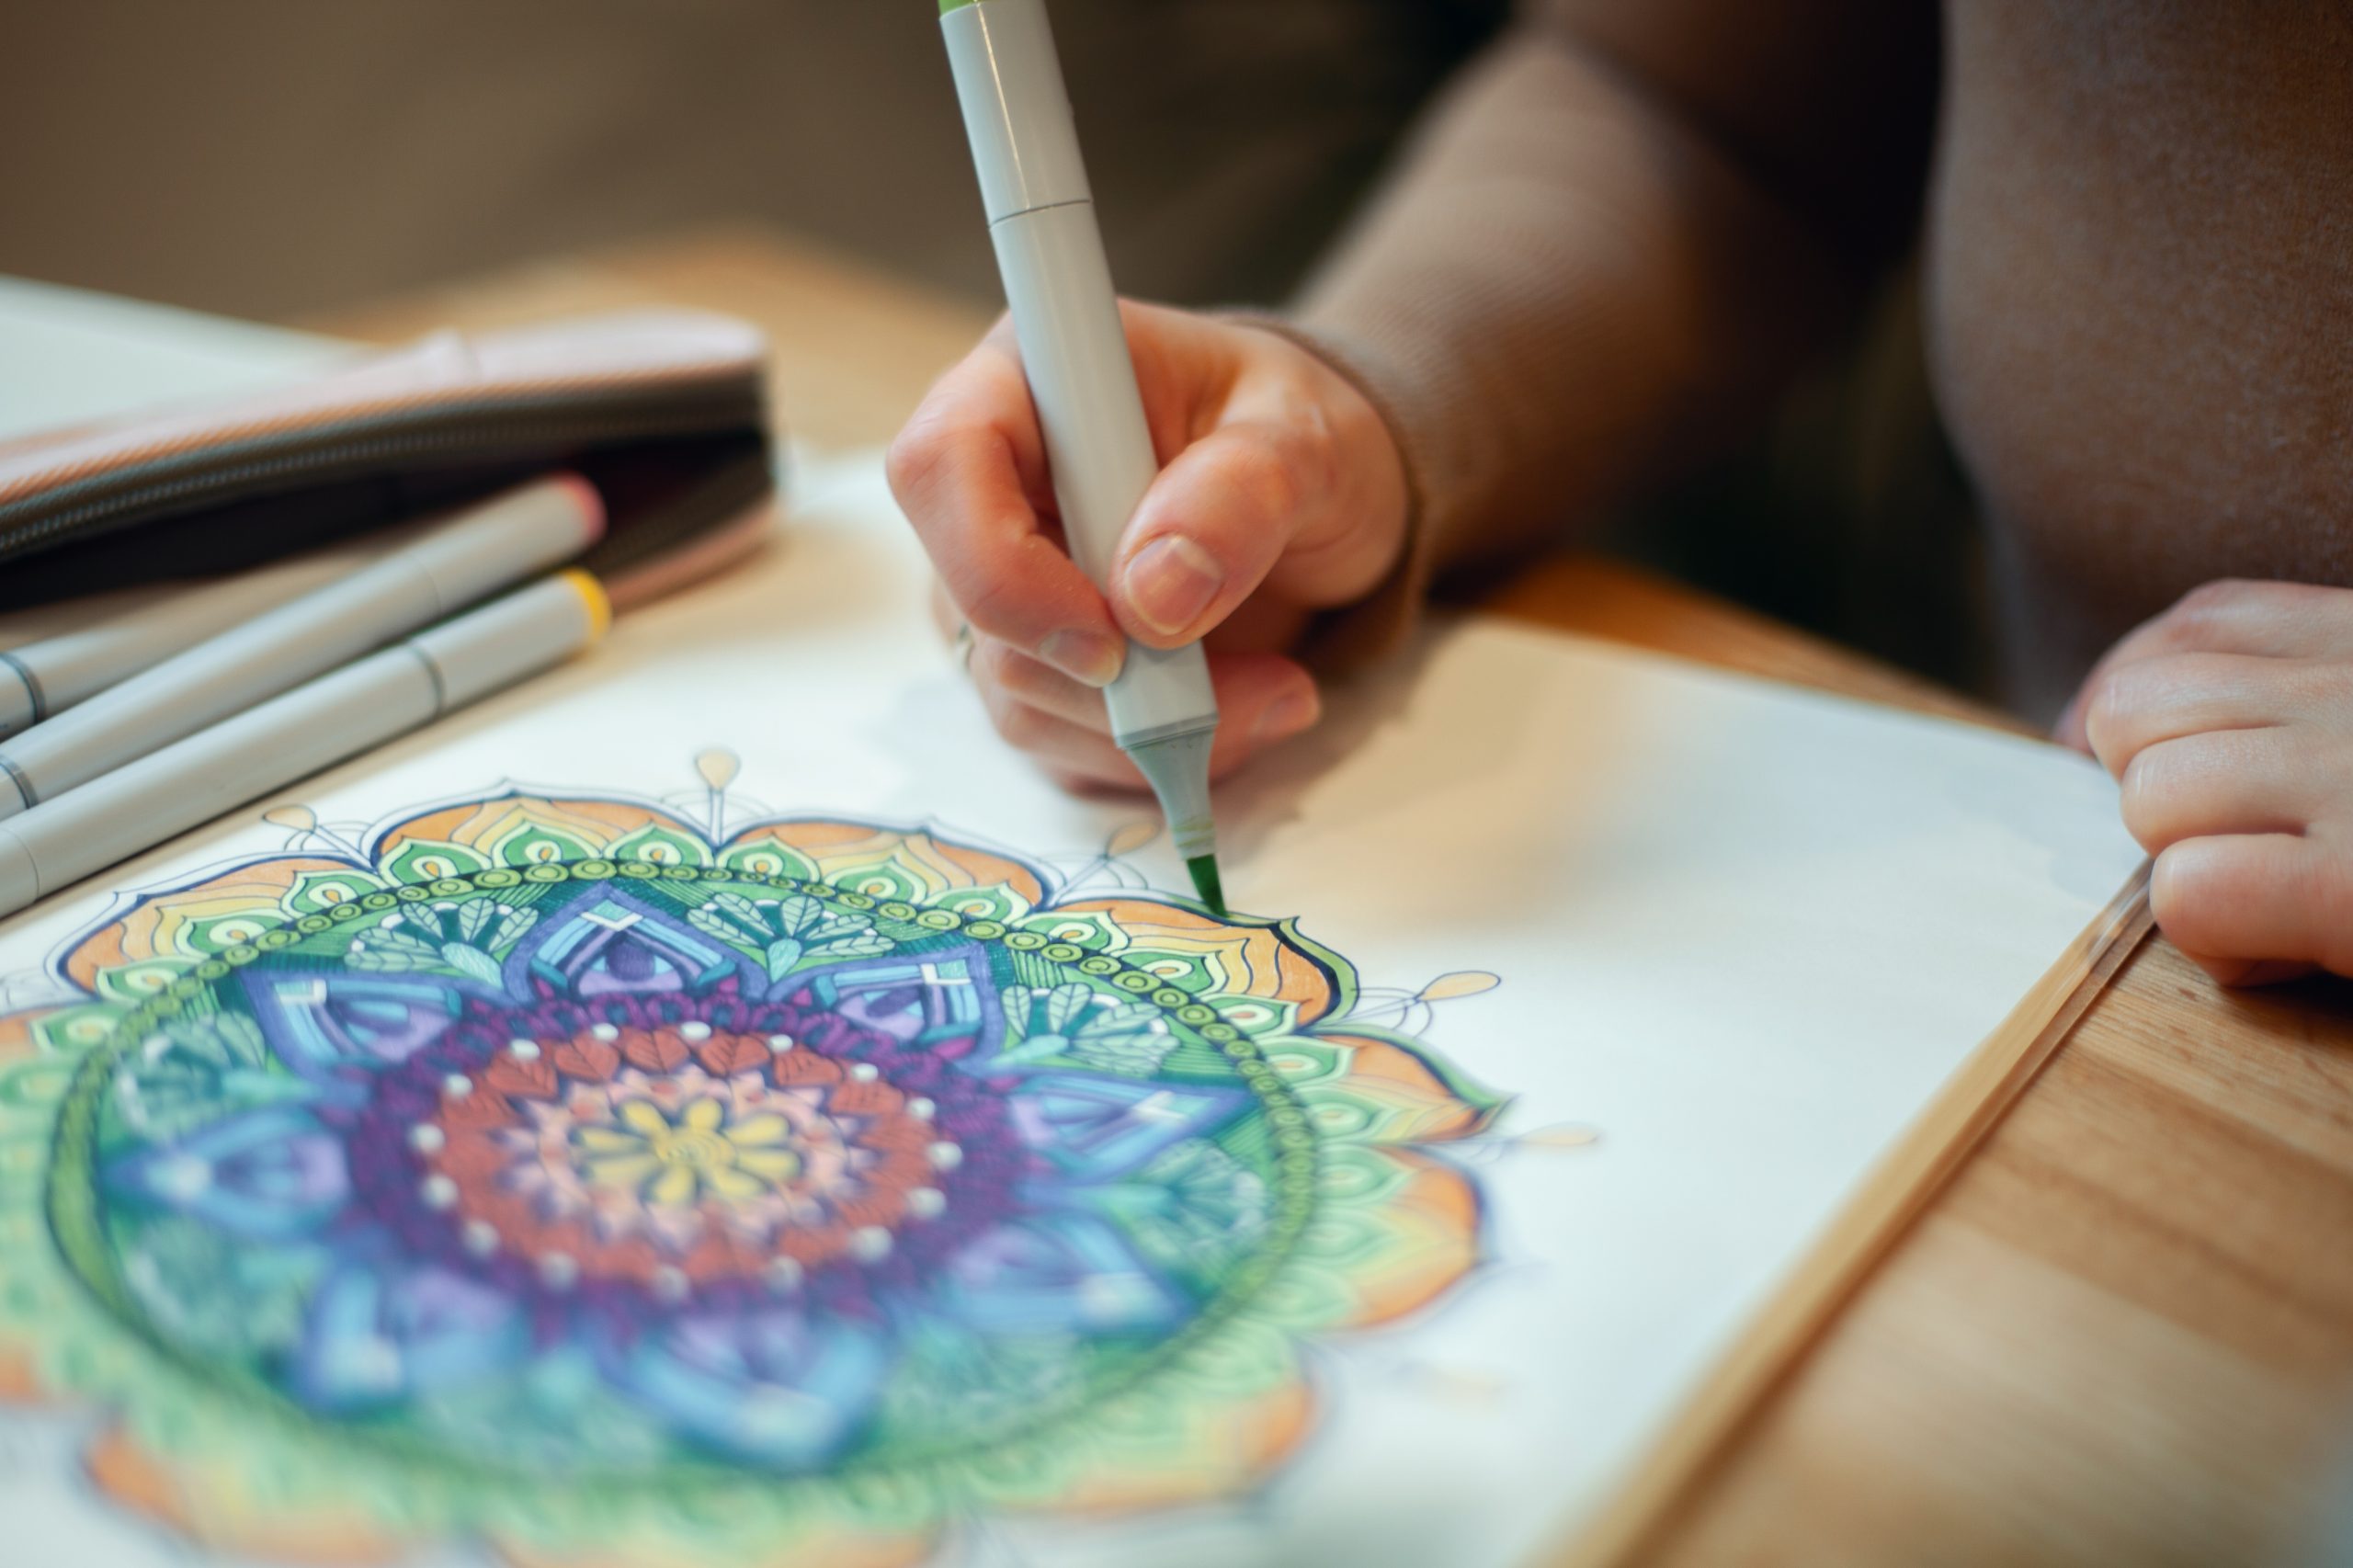 colouring for dementia, Woman holding a green marker and colouring a mandala pattern